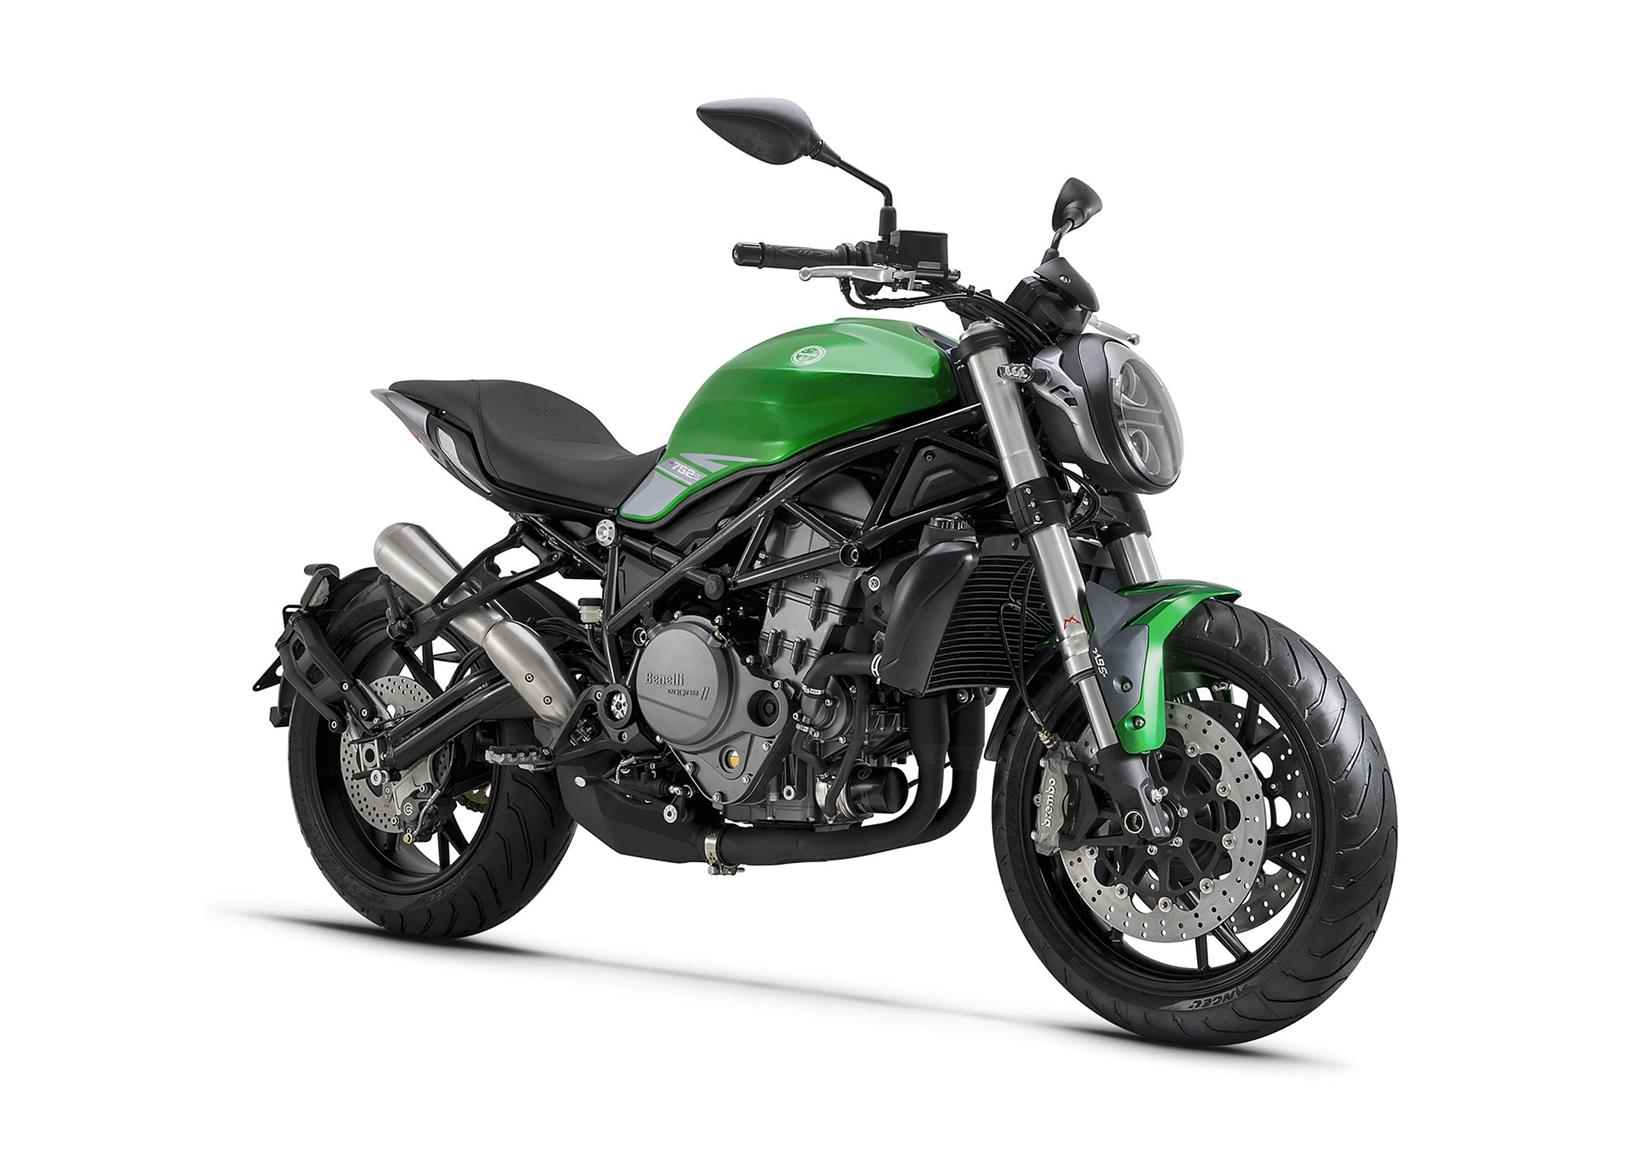 2018 BN 125 Benelli Naked Motorcycle - Review Specs